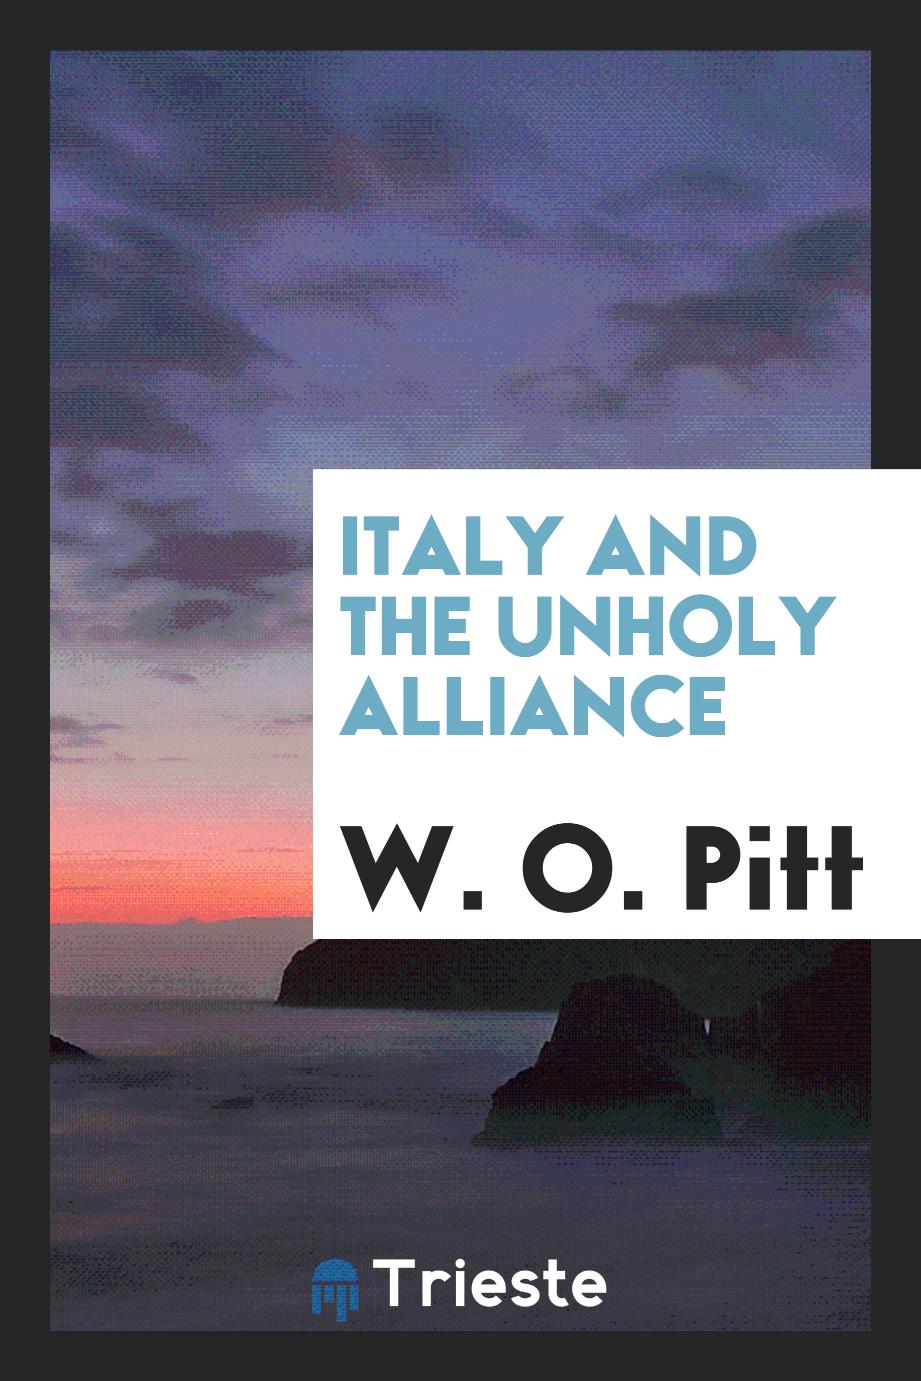 Italy and the Unholy Alliance